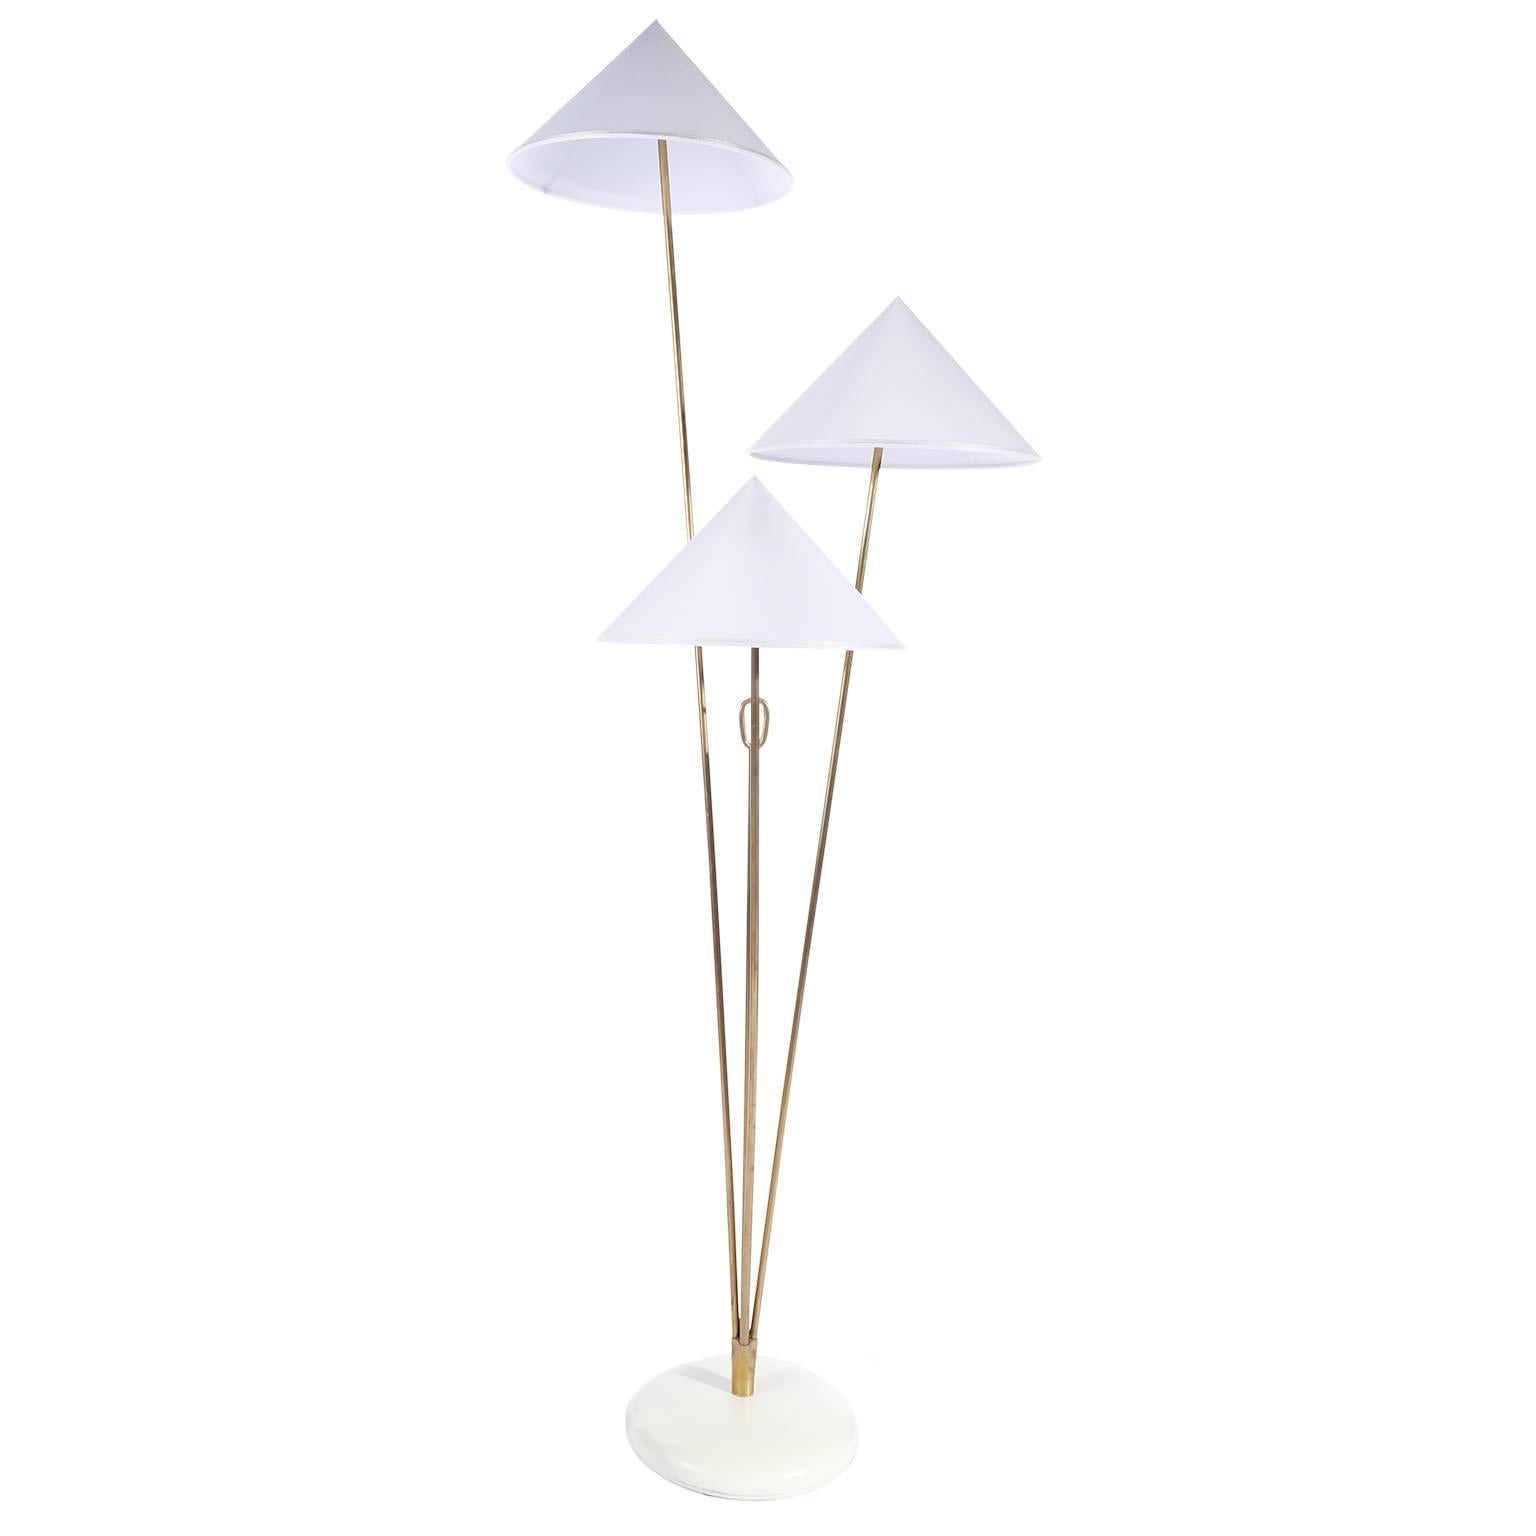 A brass floor lamp with cone shaped lampshades by Rupert Nikoll, Vienna, Austria, manufactured in midcentury, circa 1960 (late 1950s or early 1960s). 
The stand is made of three brass rods in different lengths, a shorter brass rod with a handle,